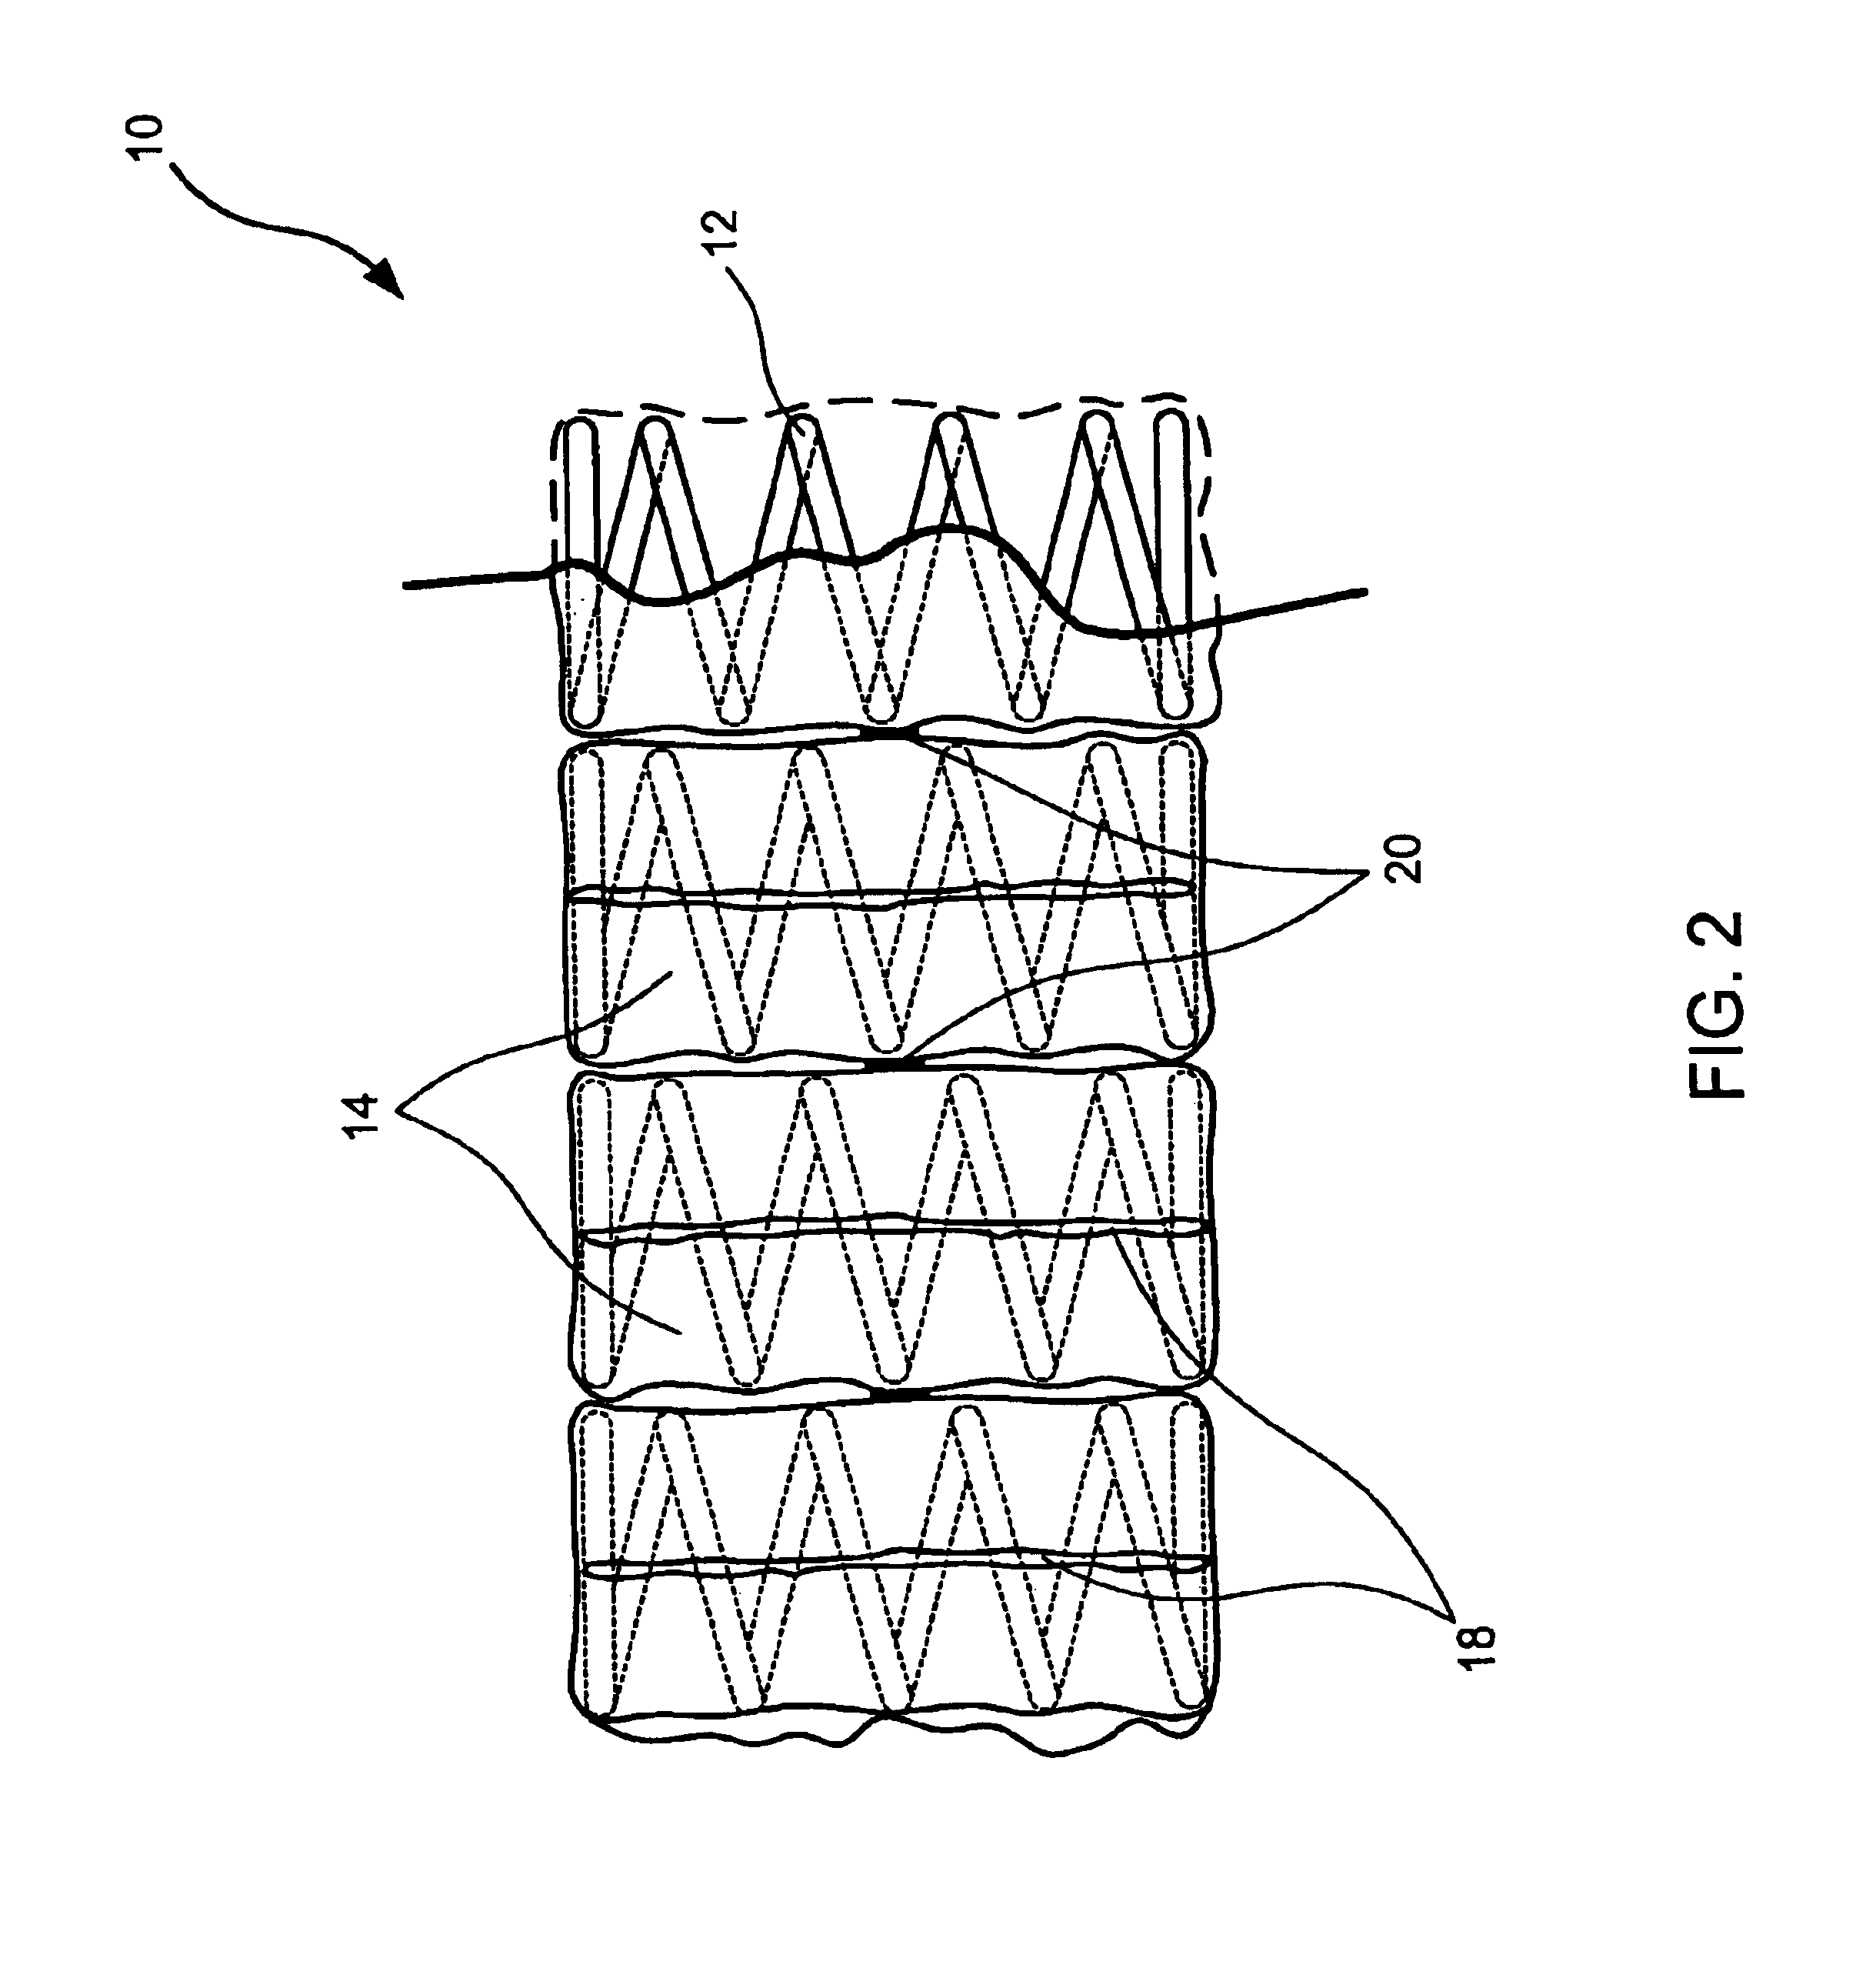 No-flip mattress systems and methods